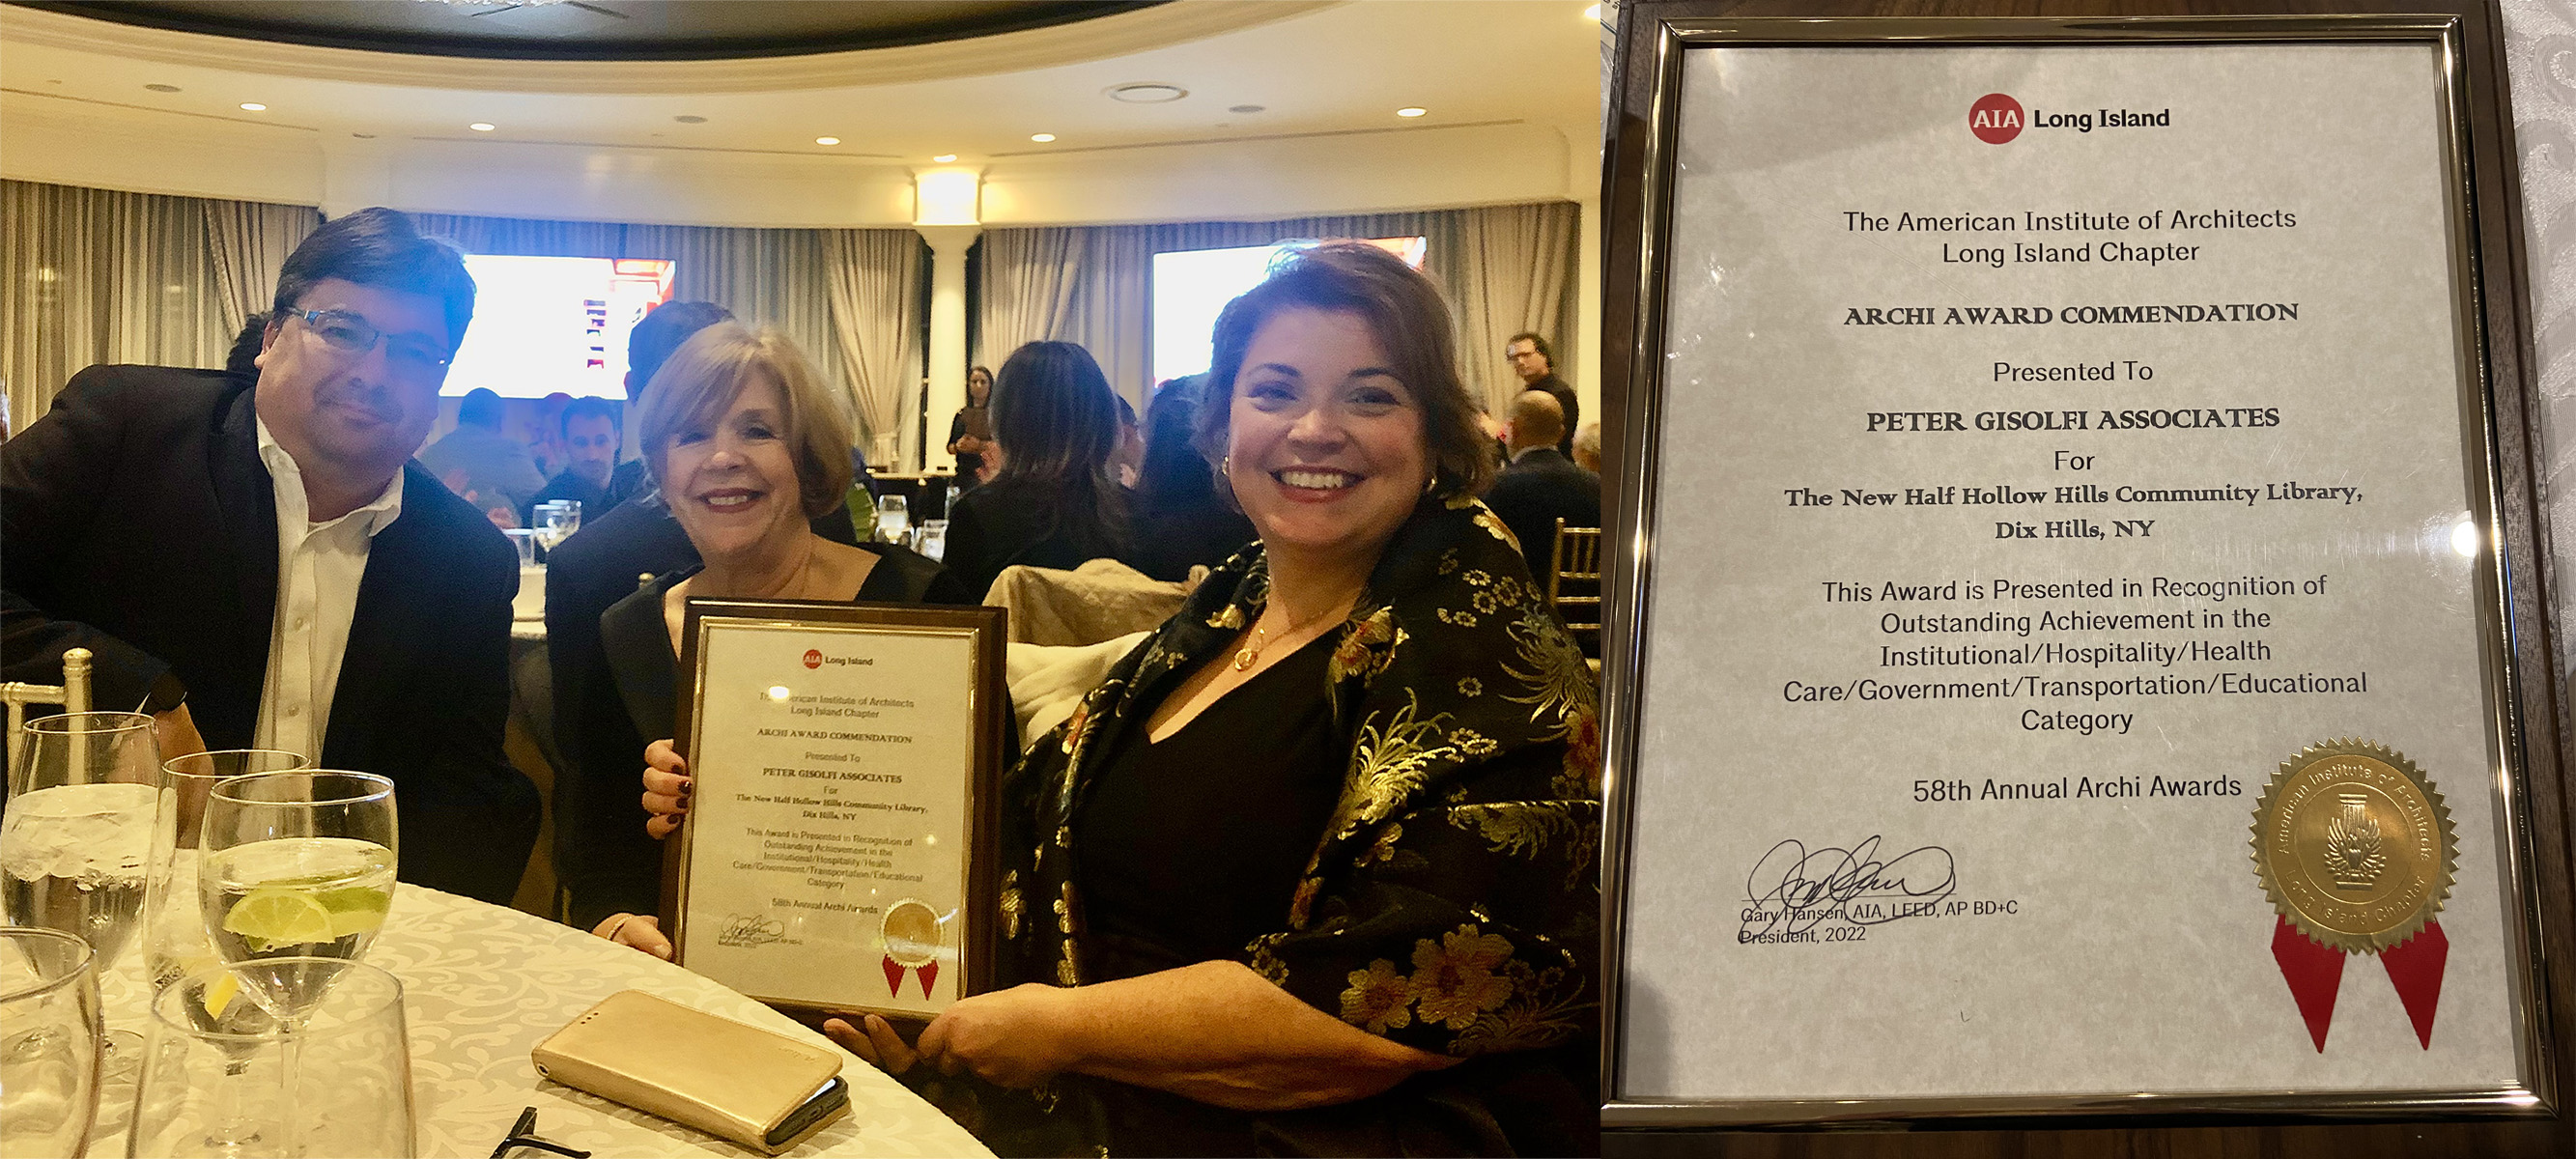 Board President Jacob Goldman, Assistant Director Charlene Muhr, and Director Helen Crosson with the AIA Long Island Archi Award Commendation for Outstanding Achievement